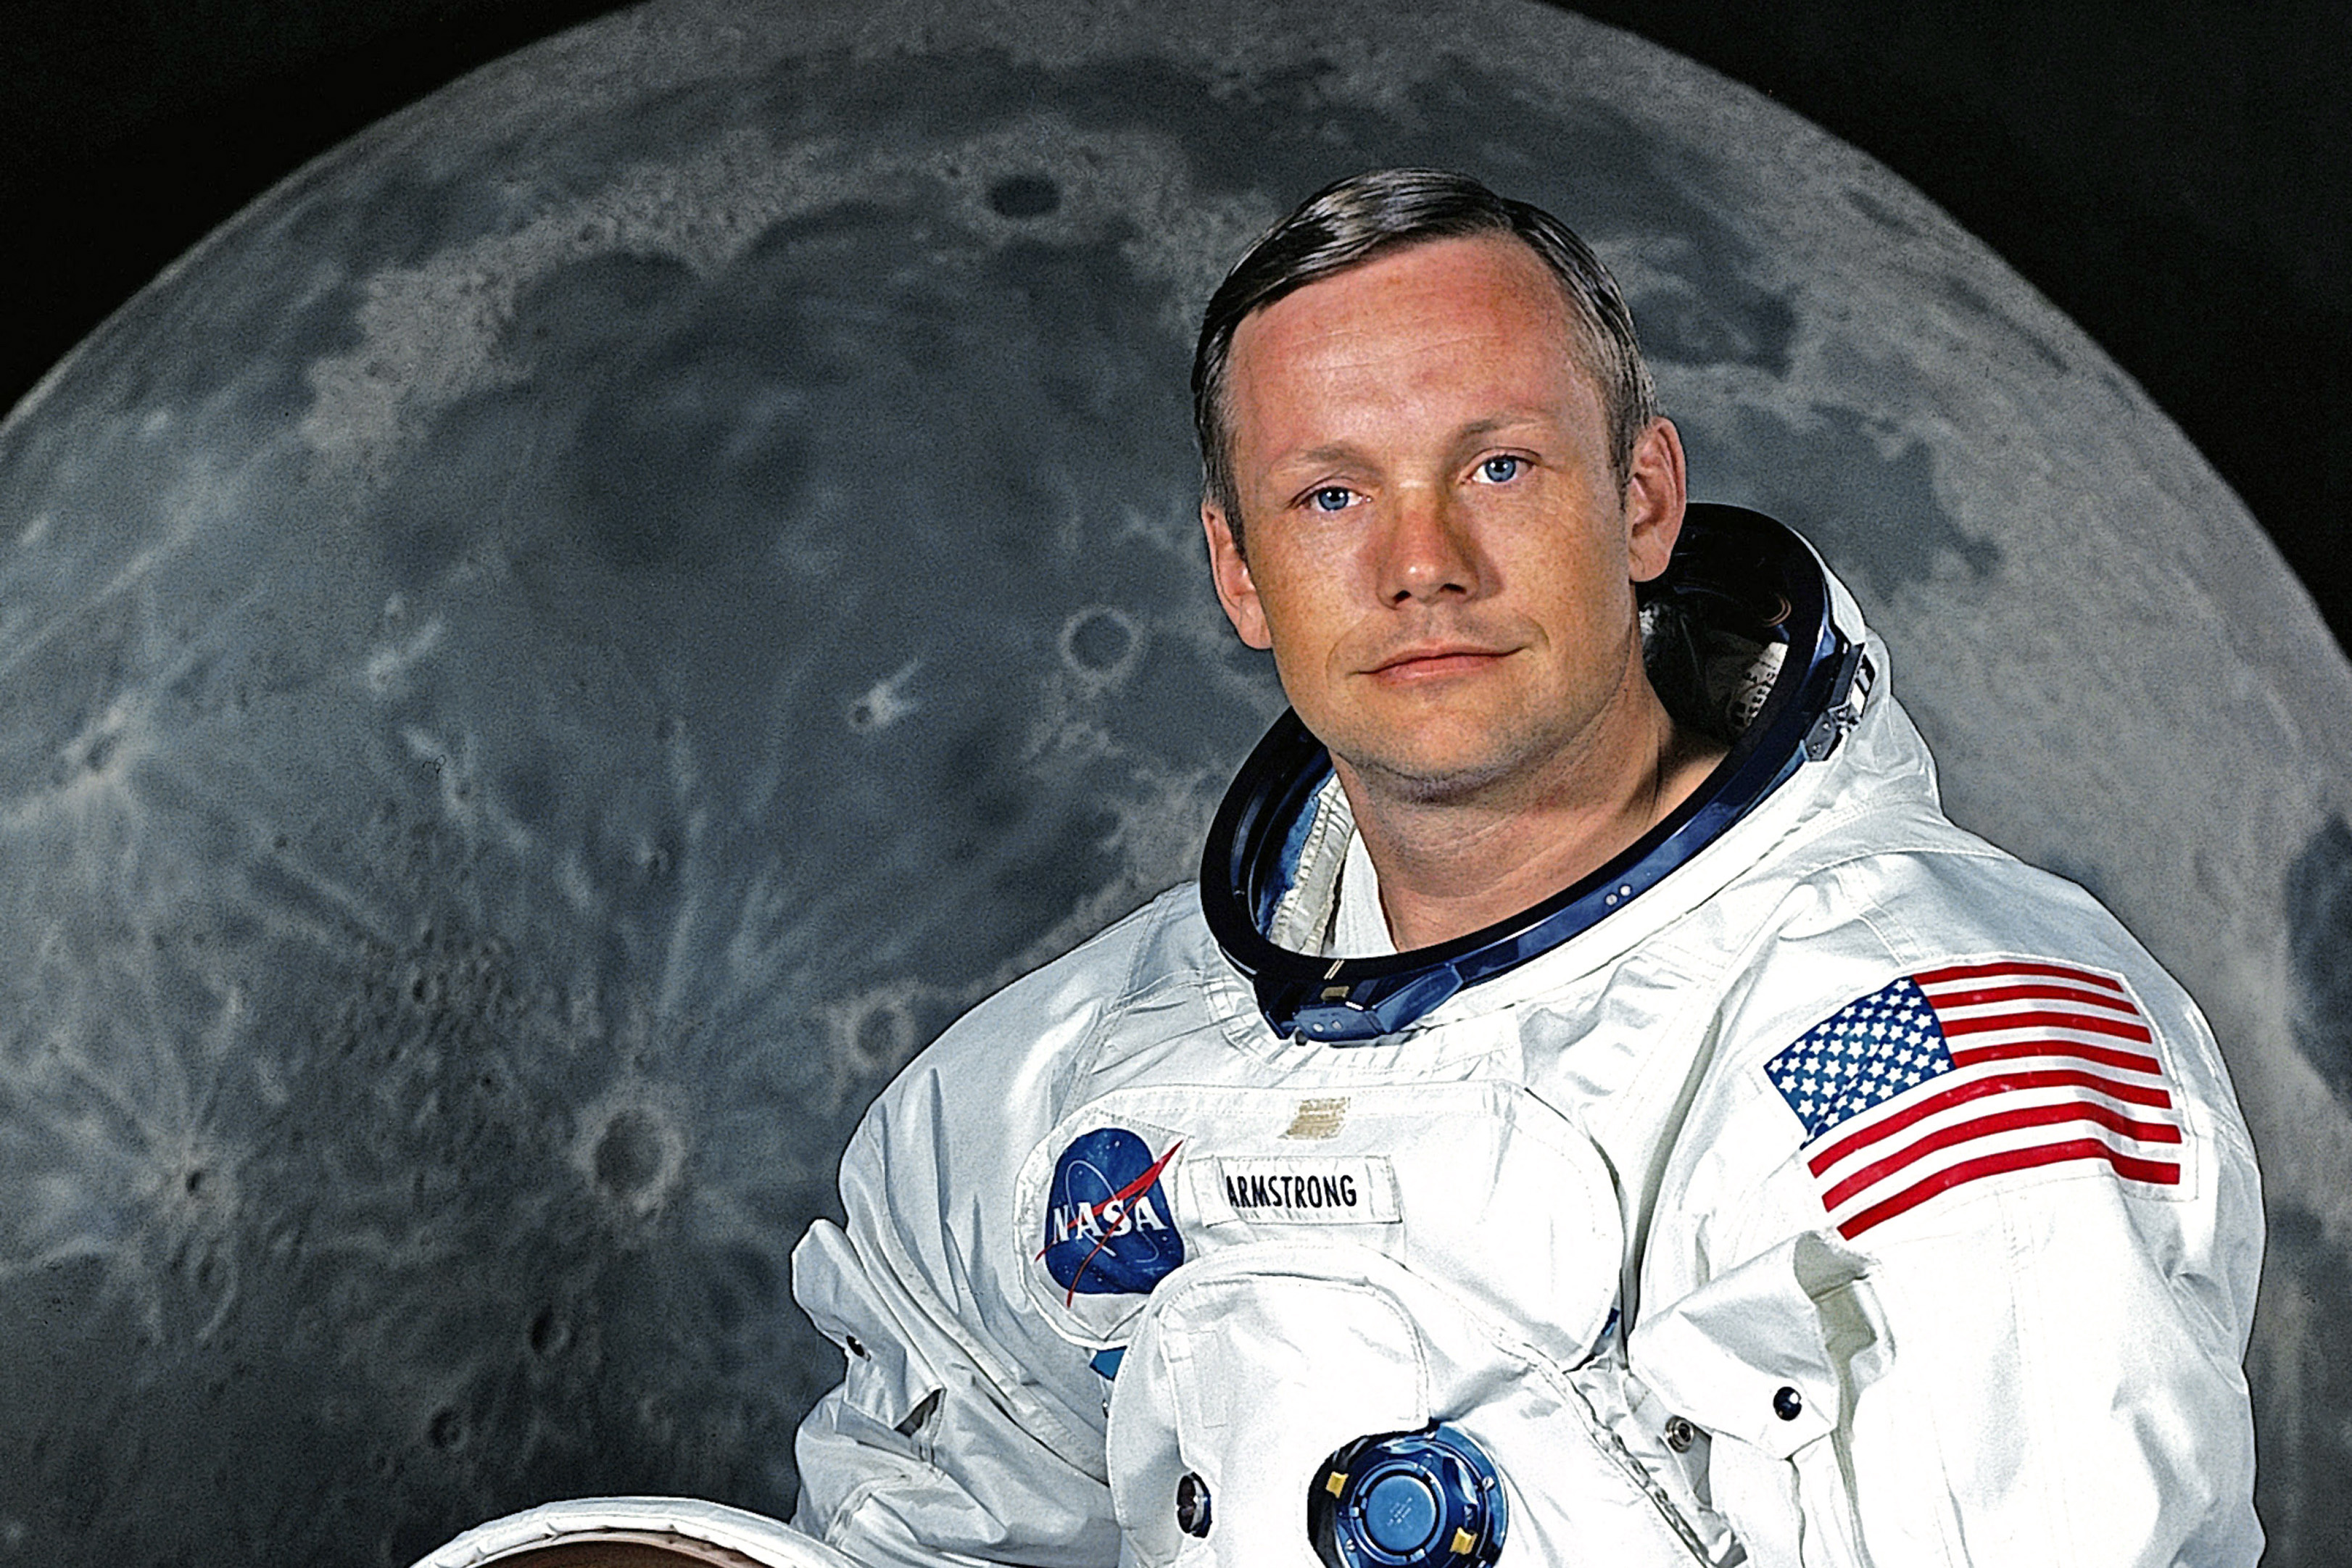 Neil armstrong moon